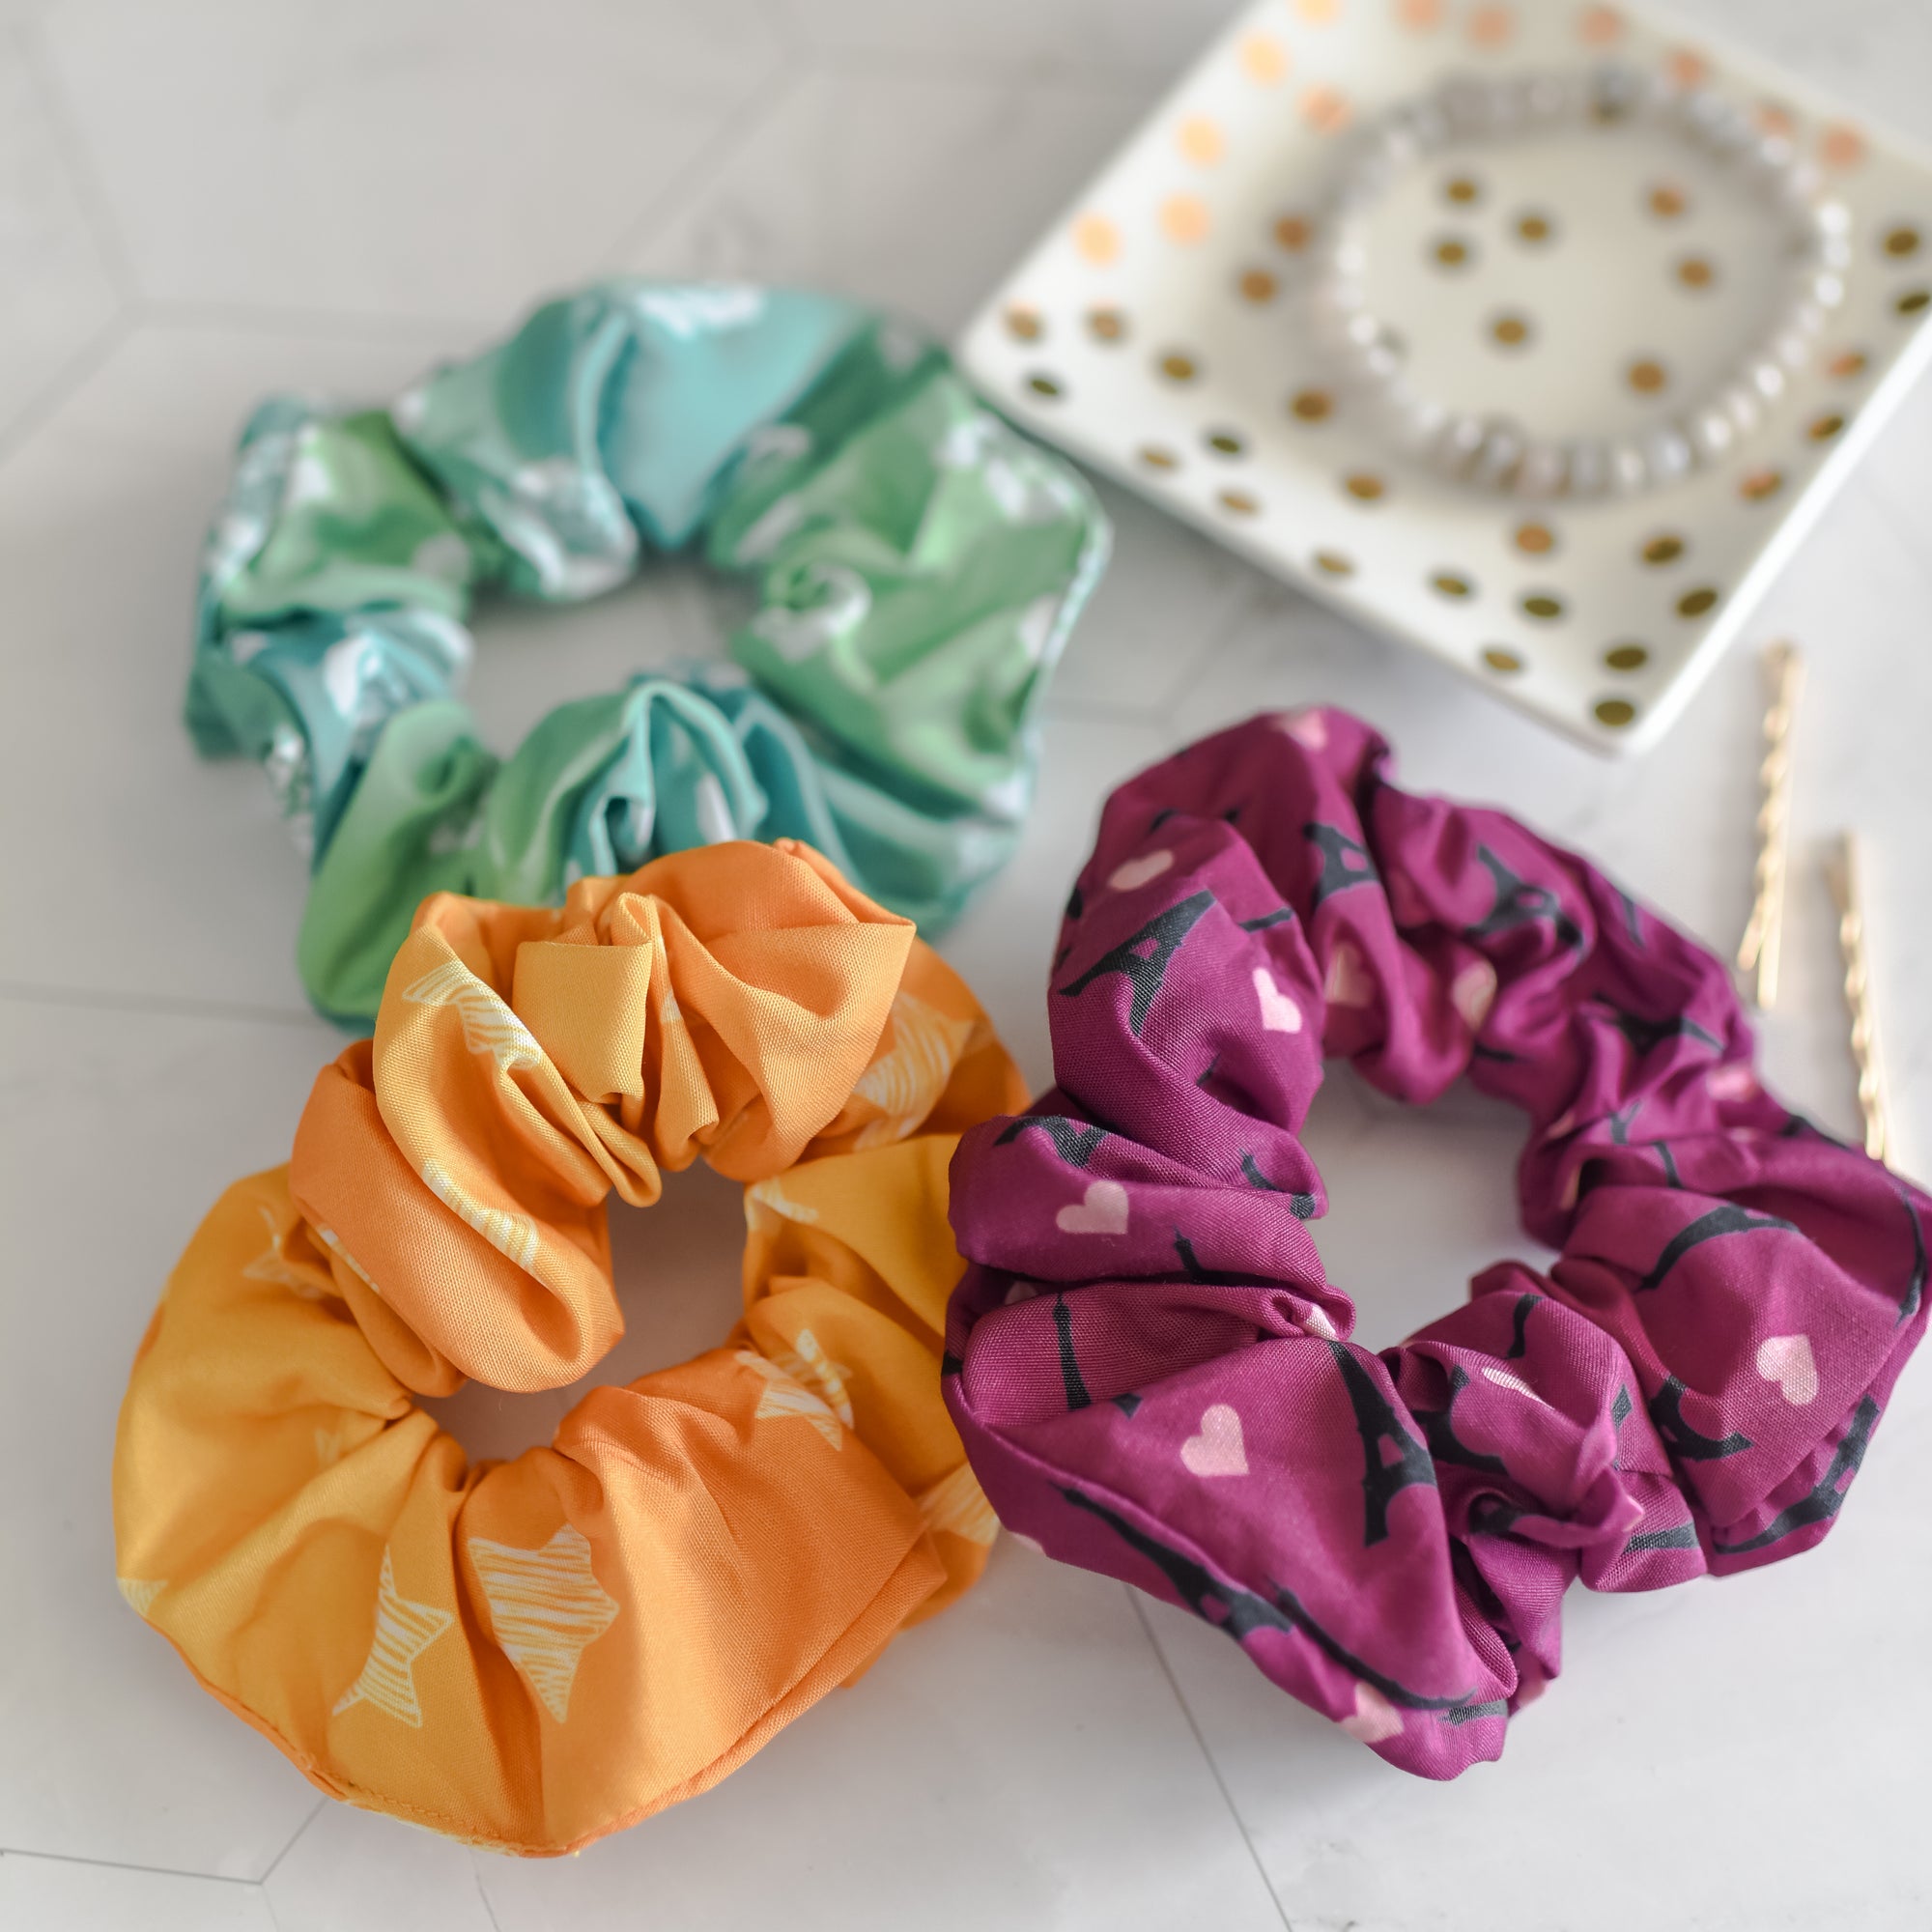 3 Hopeless Romantic scrunchies: light green with roses, purple with hearts and Eiffel Towers, and yellow with stars